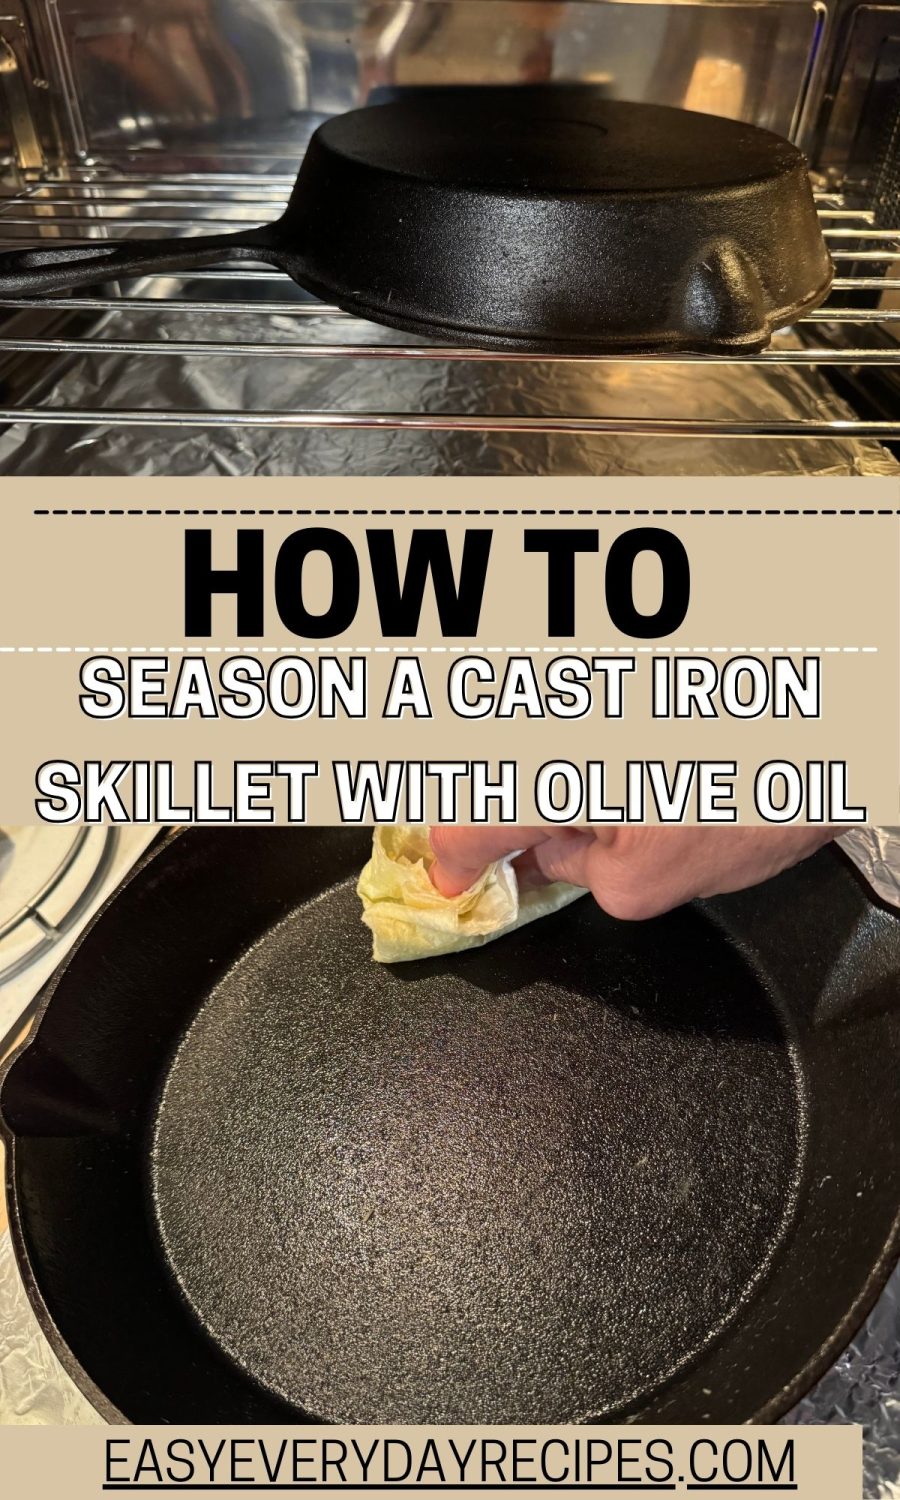 How to season a cast iron skillet with olive oil.